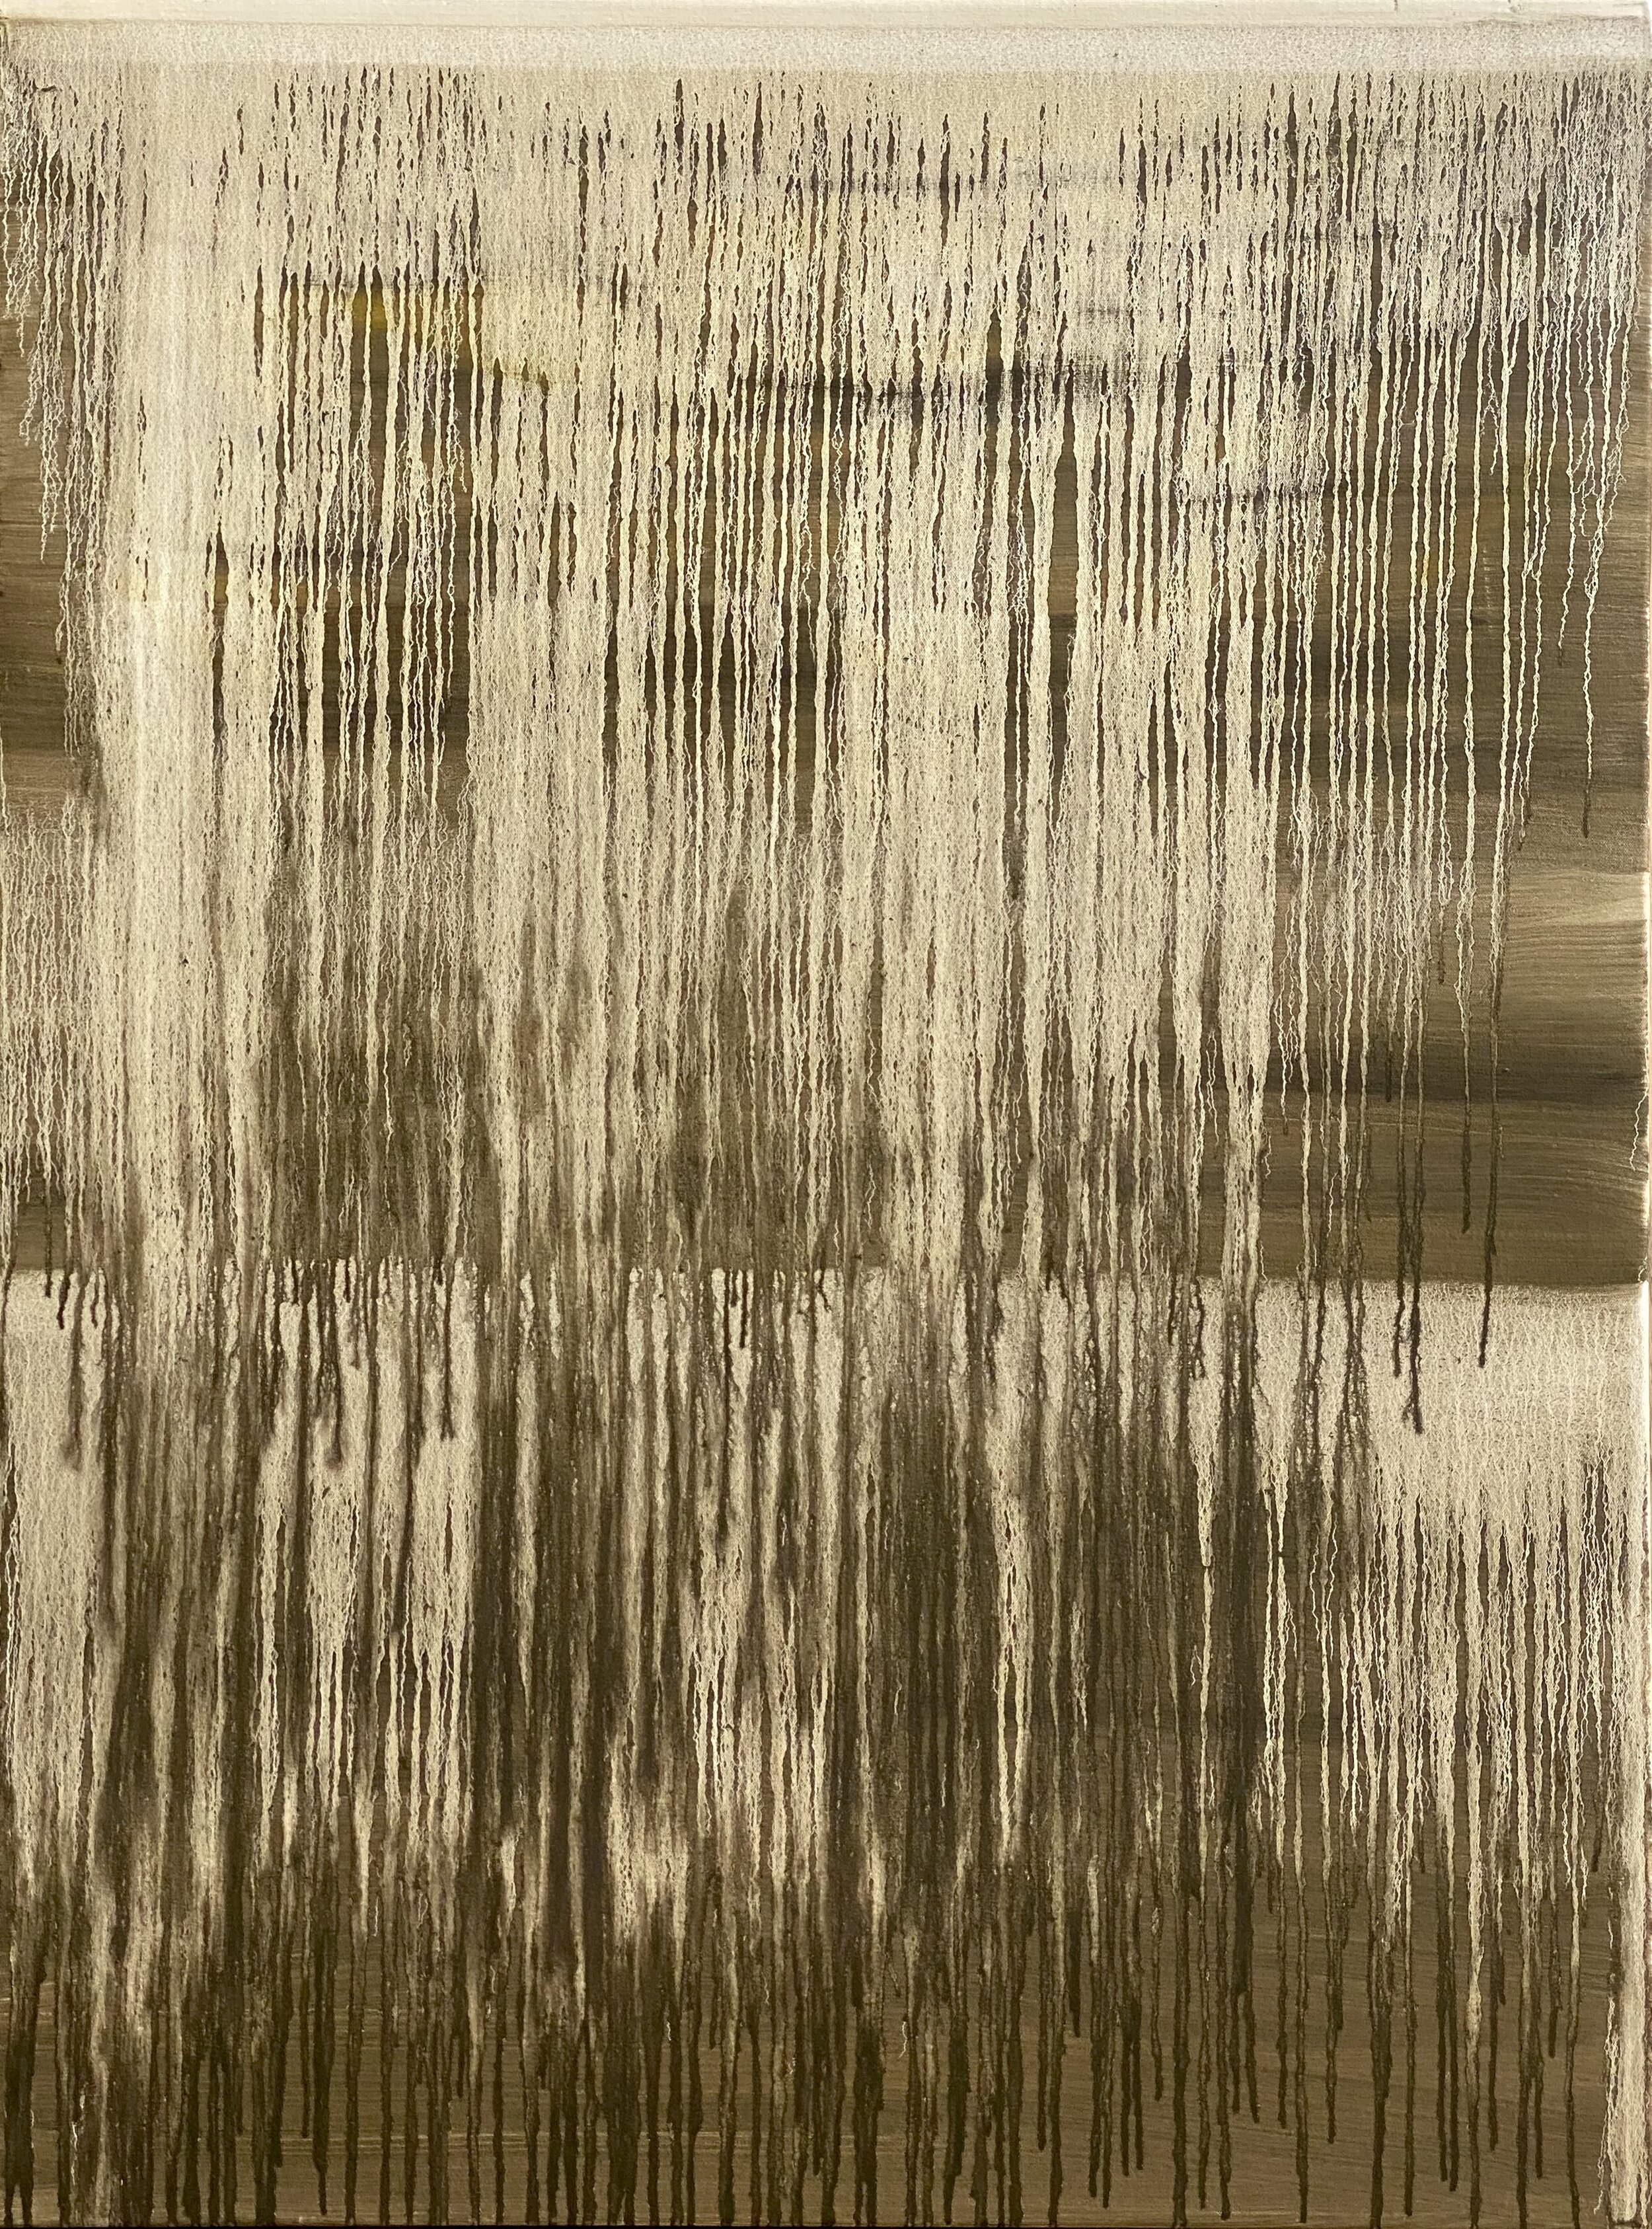 Green Curtain, 2020,  oil on canvas, 36 x 48 in, price upon request